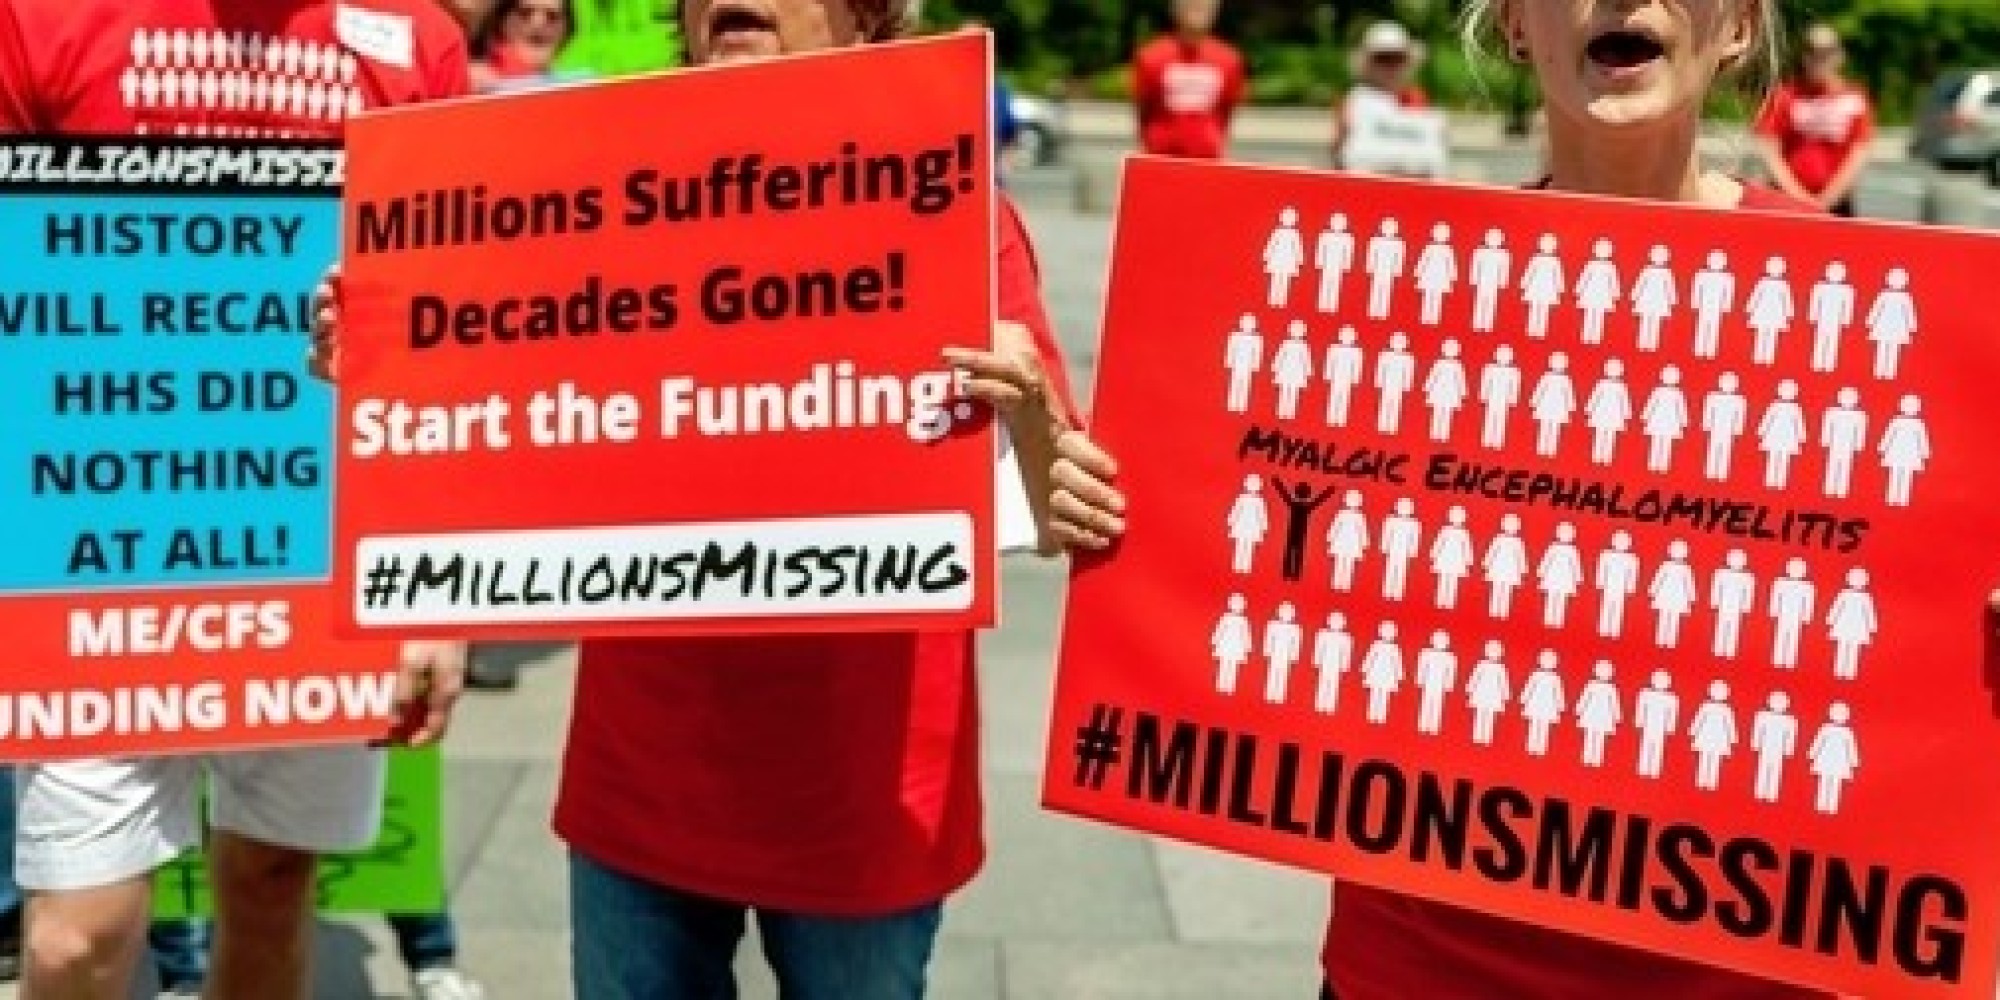 Millions Are Missing: Will The World Finally Notice? | HuffPost